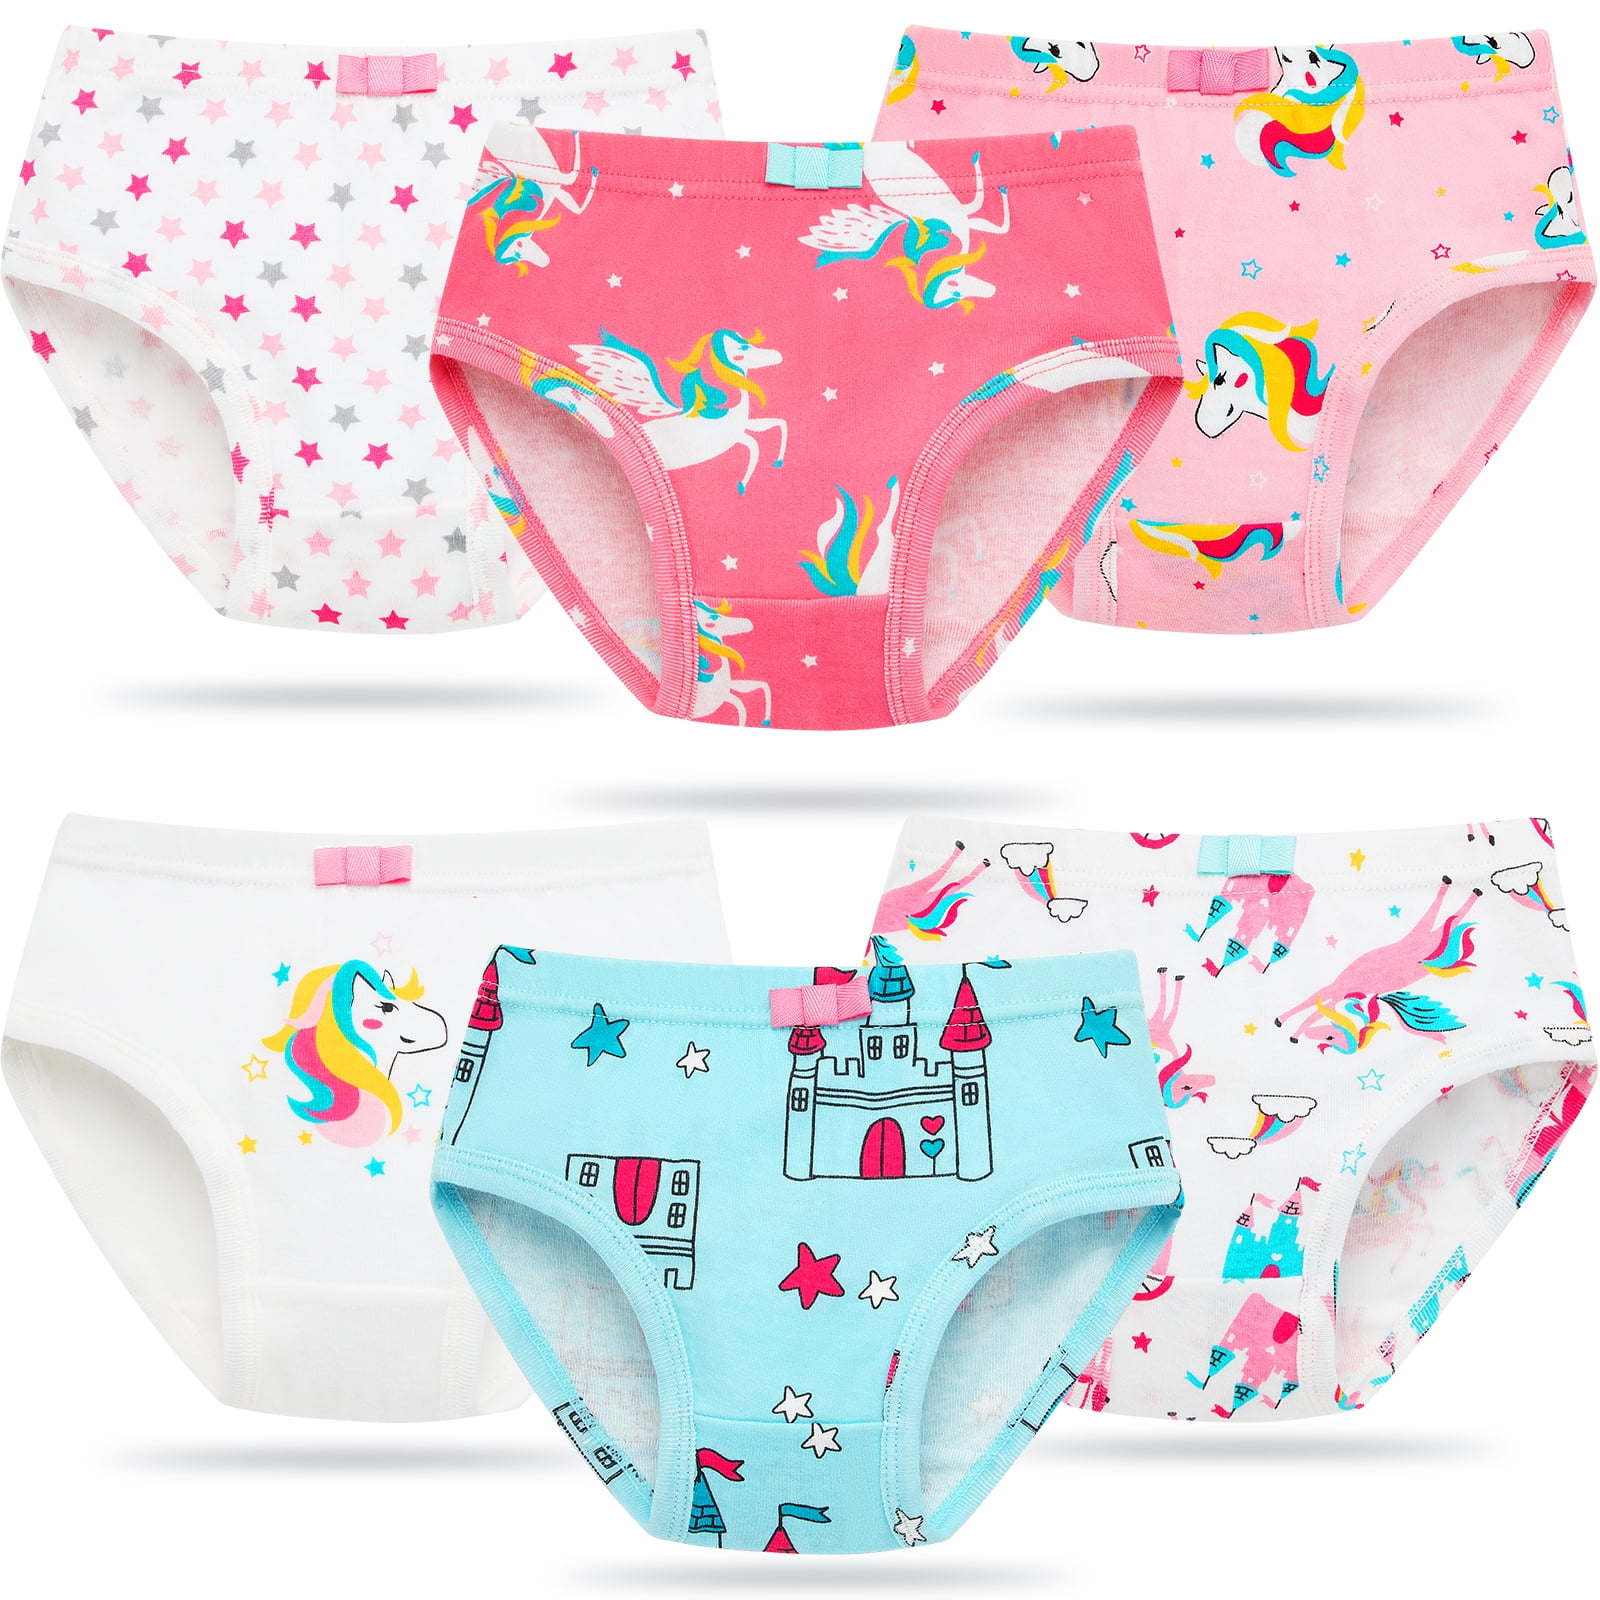 Jeccie 6 Packs Girls Underwear 100% Cotton Breathable Comfort Panties for  Little Girls 5-6 Years - Unicorn,Castle,Stars